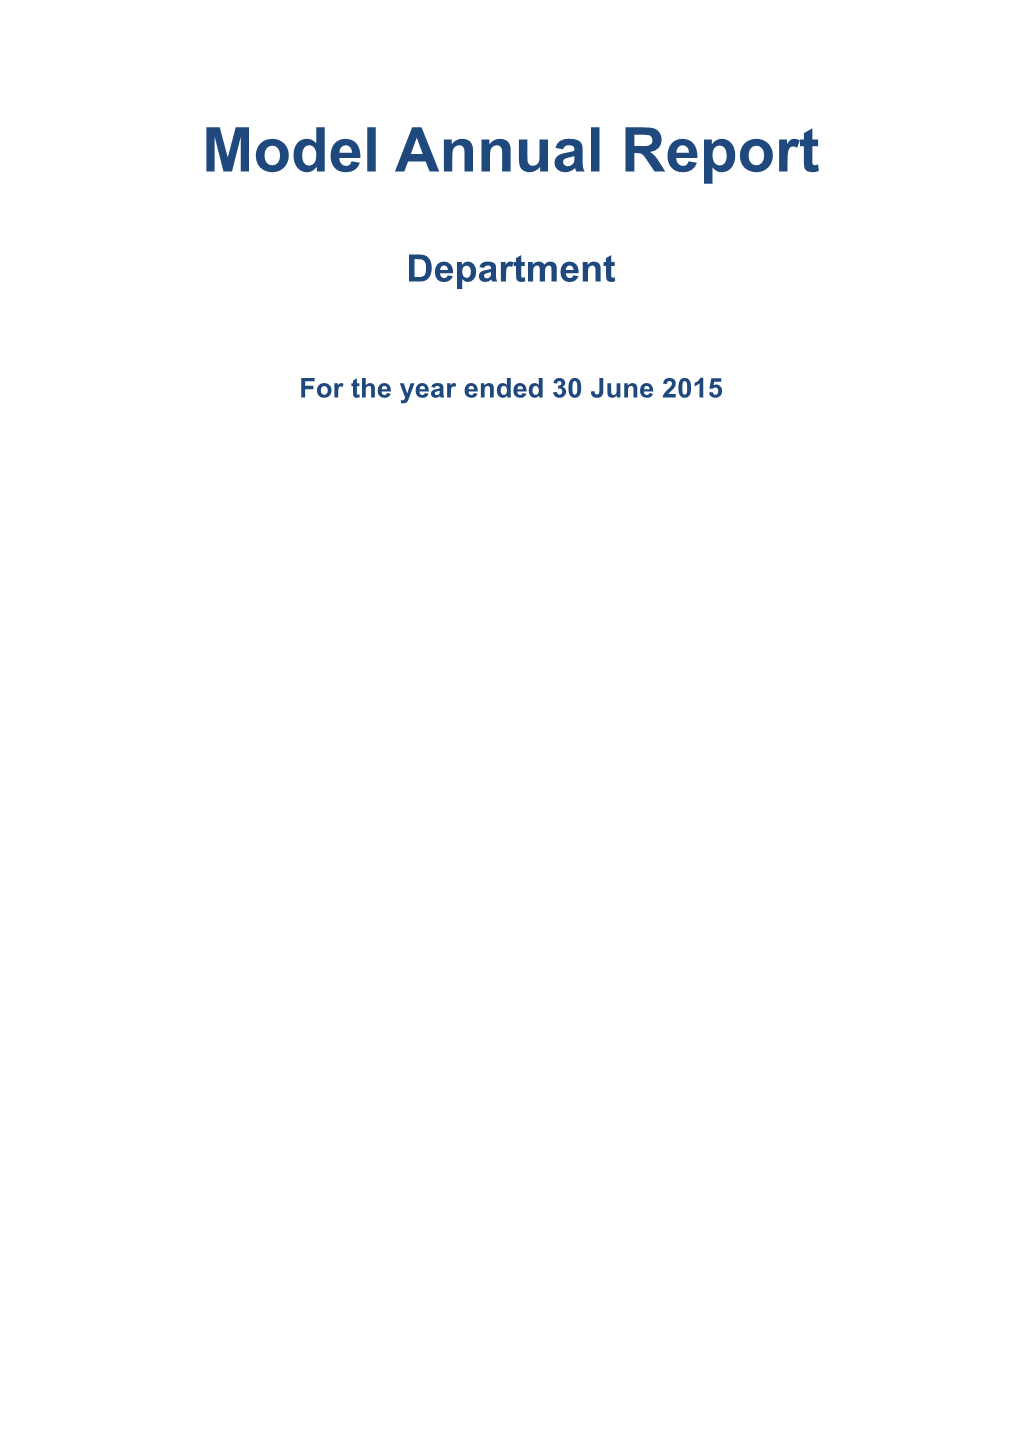 Model Annual Report for Departments